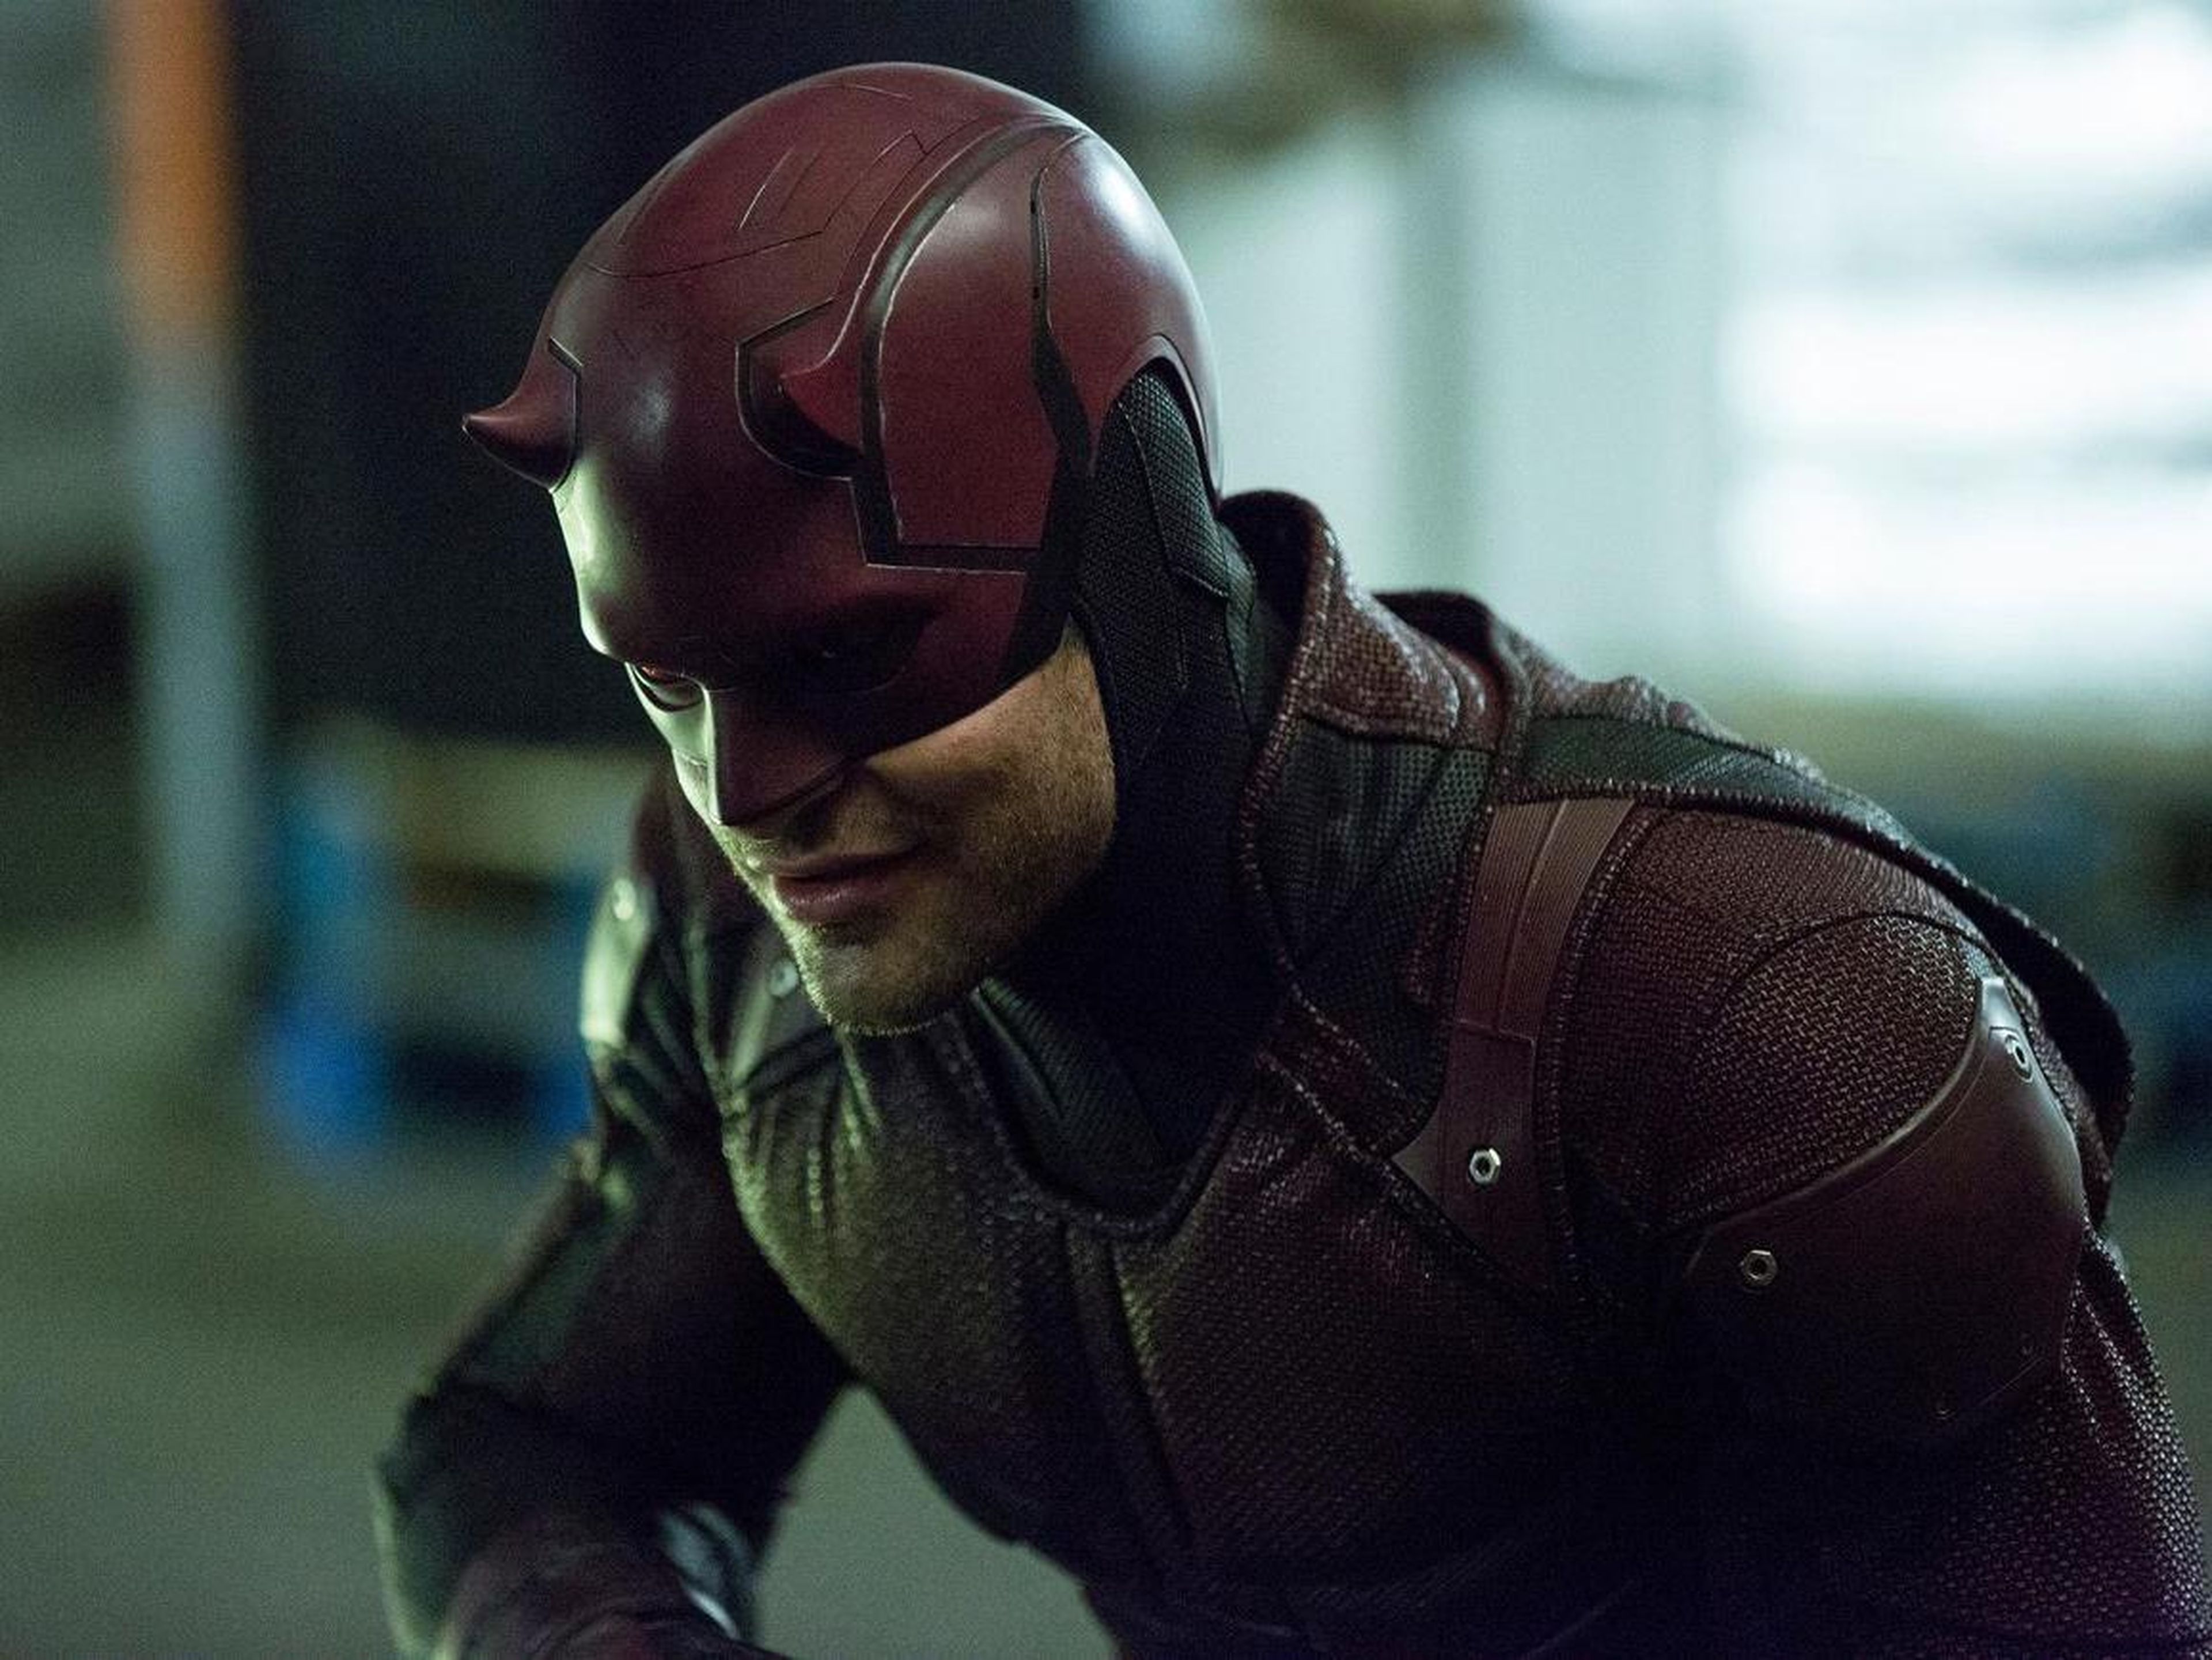 "Daredevil" had a single sequel before it sputtered out.